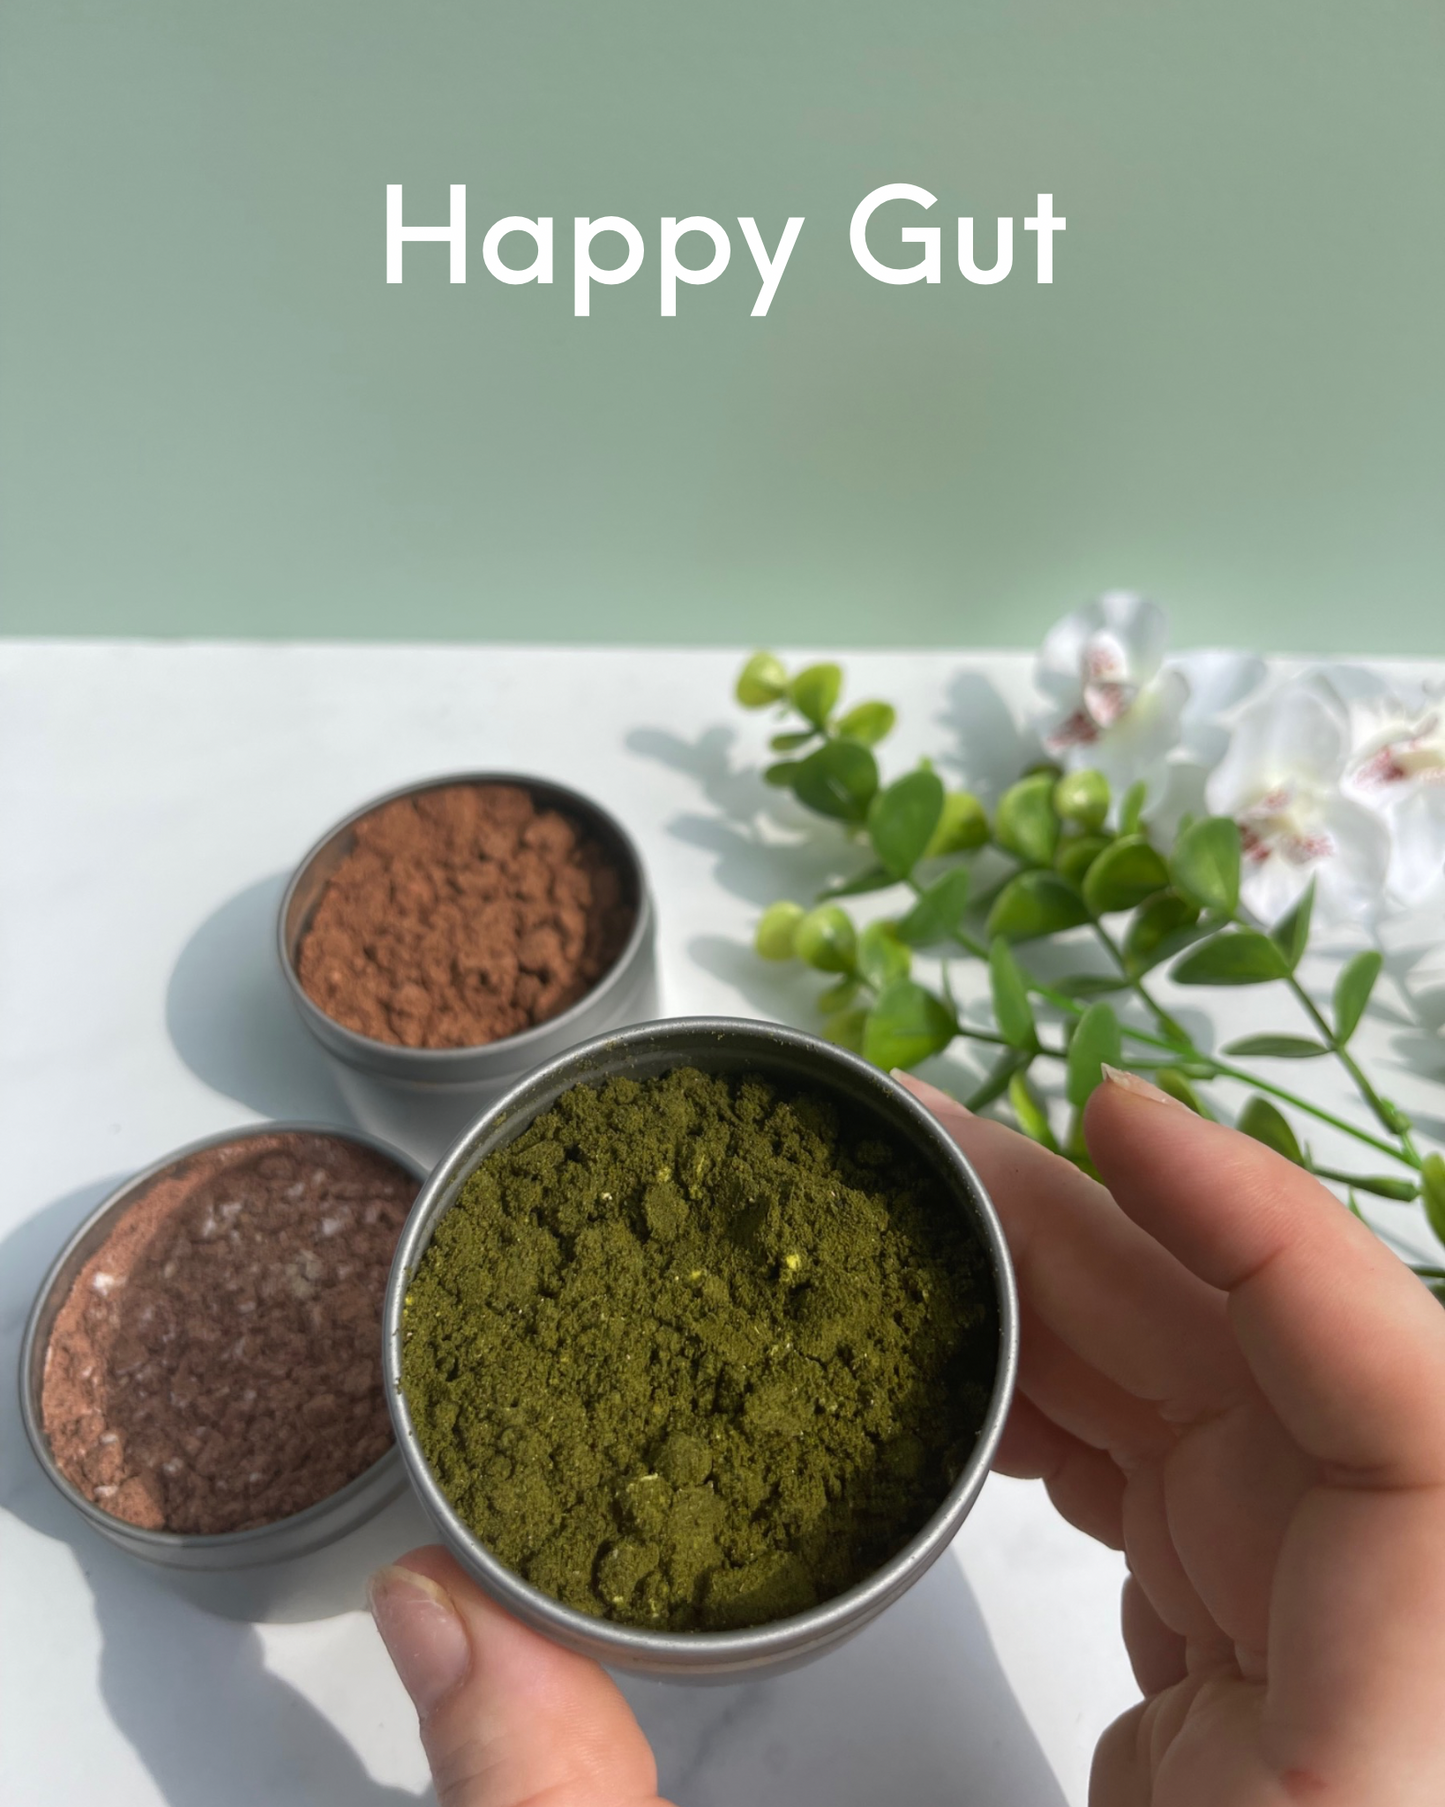 Reads: Happy Gut. Foreground : hand holding metal tin containing herbal blend. Background: 2 metal tins containing herb blends sitting on marble counter next to flowers